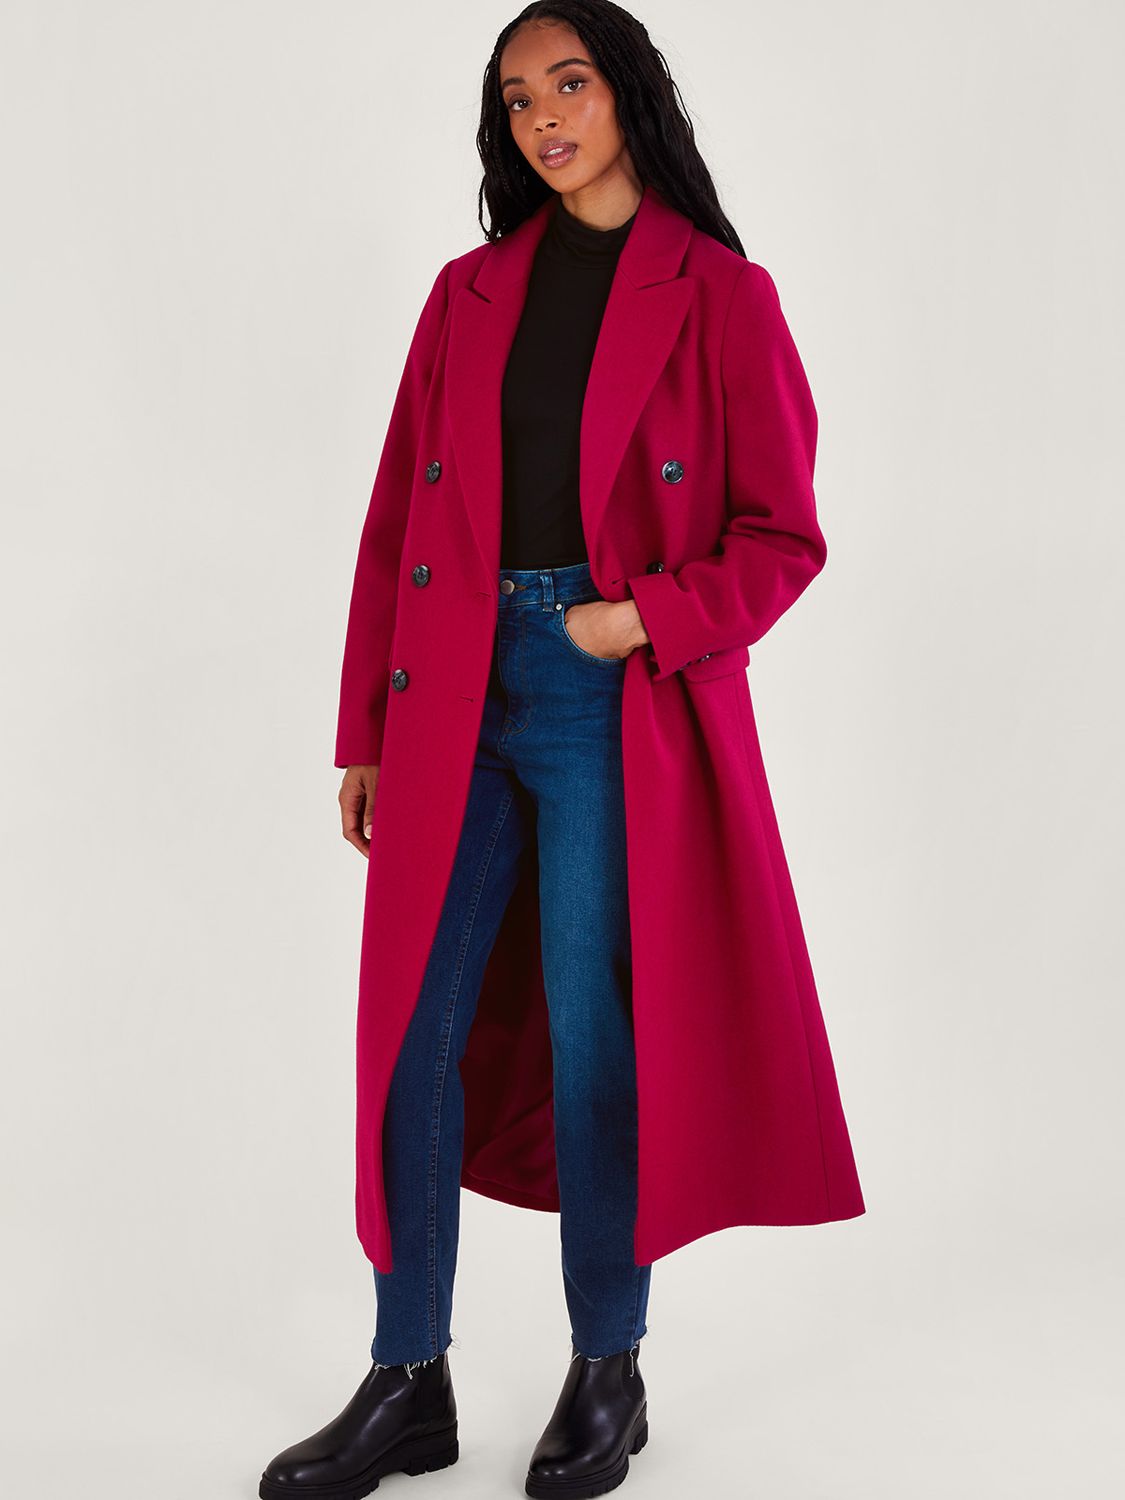 Monsoon Fay Double Breasted Wool Blend Coat, Pink at John Lewis & Partners